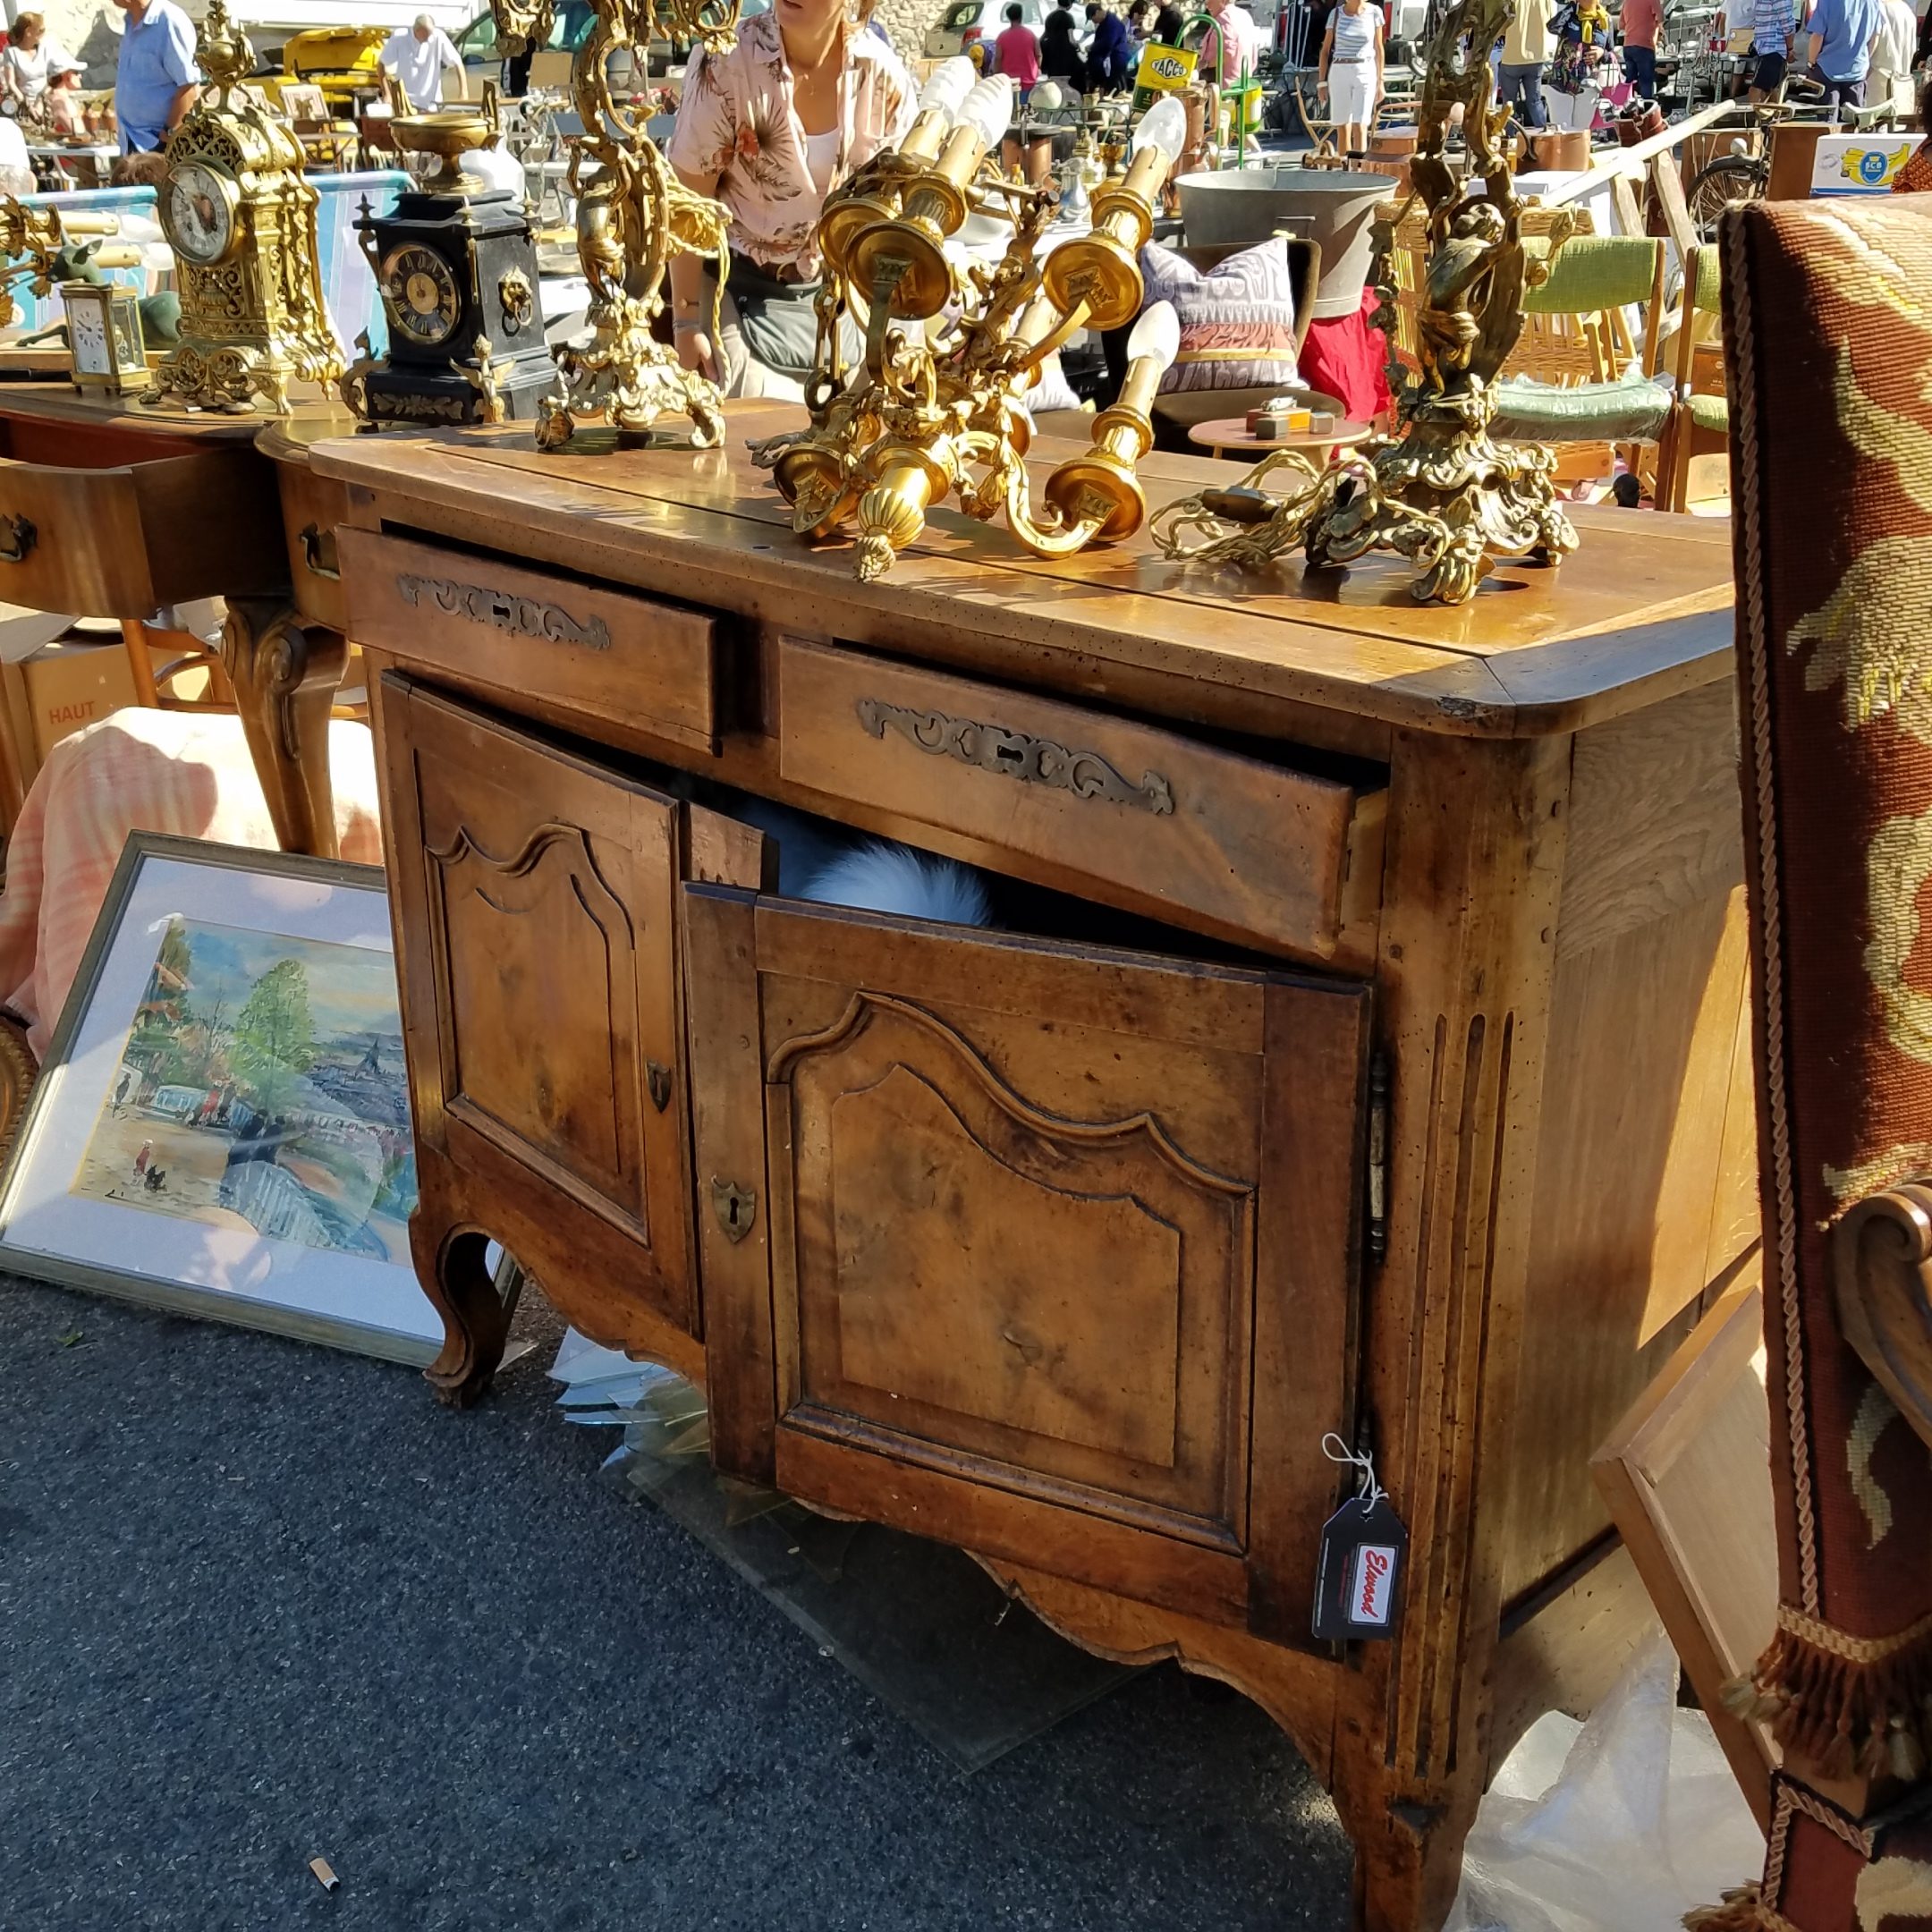 Lolo French Antiques.Shopping antique fair in Provence